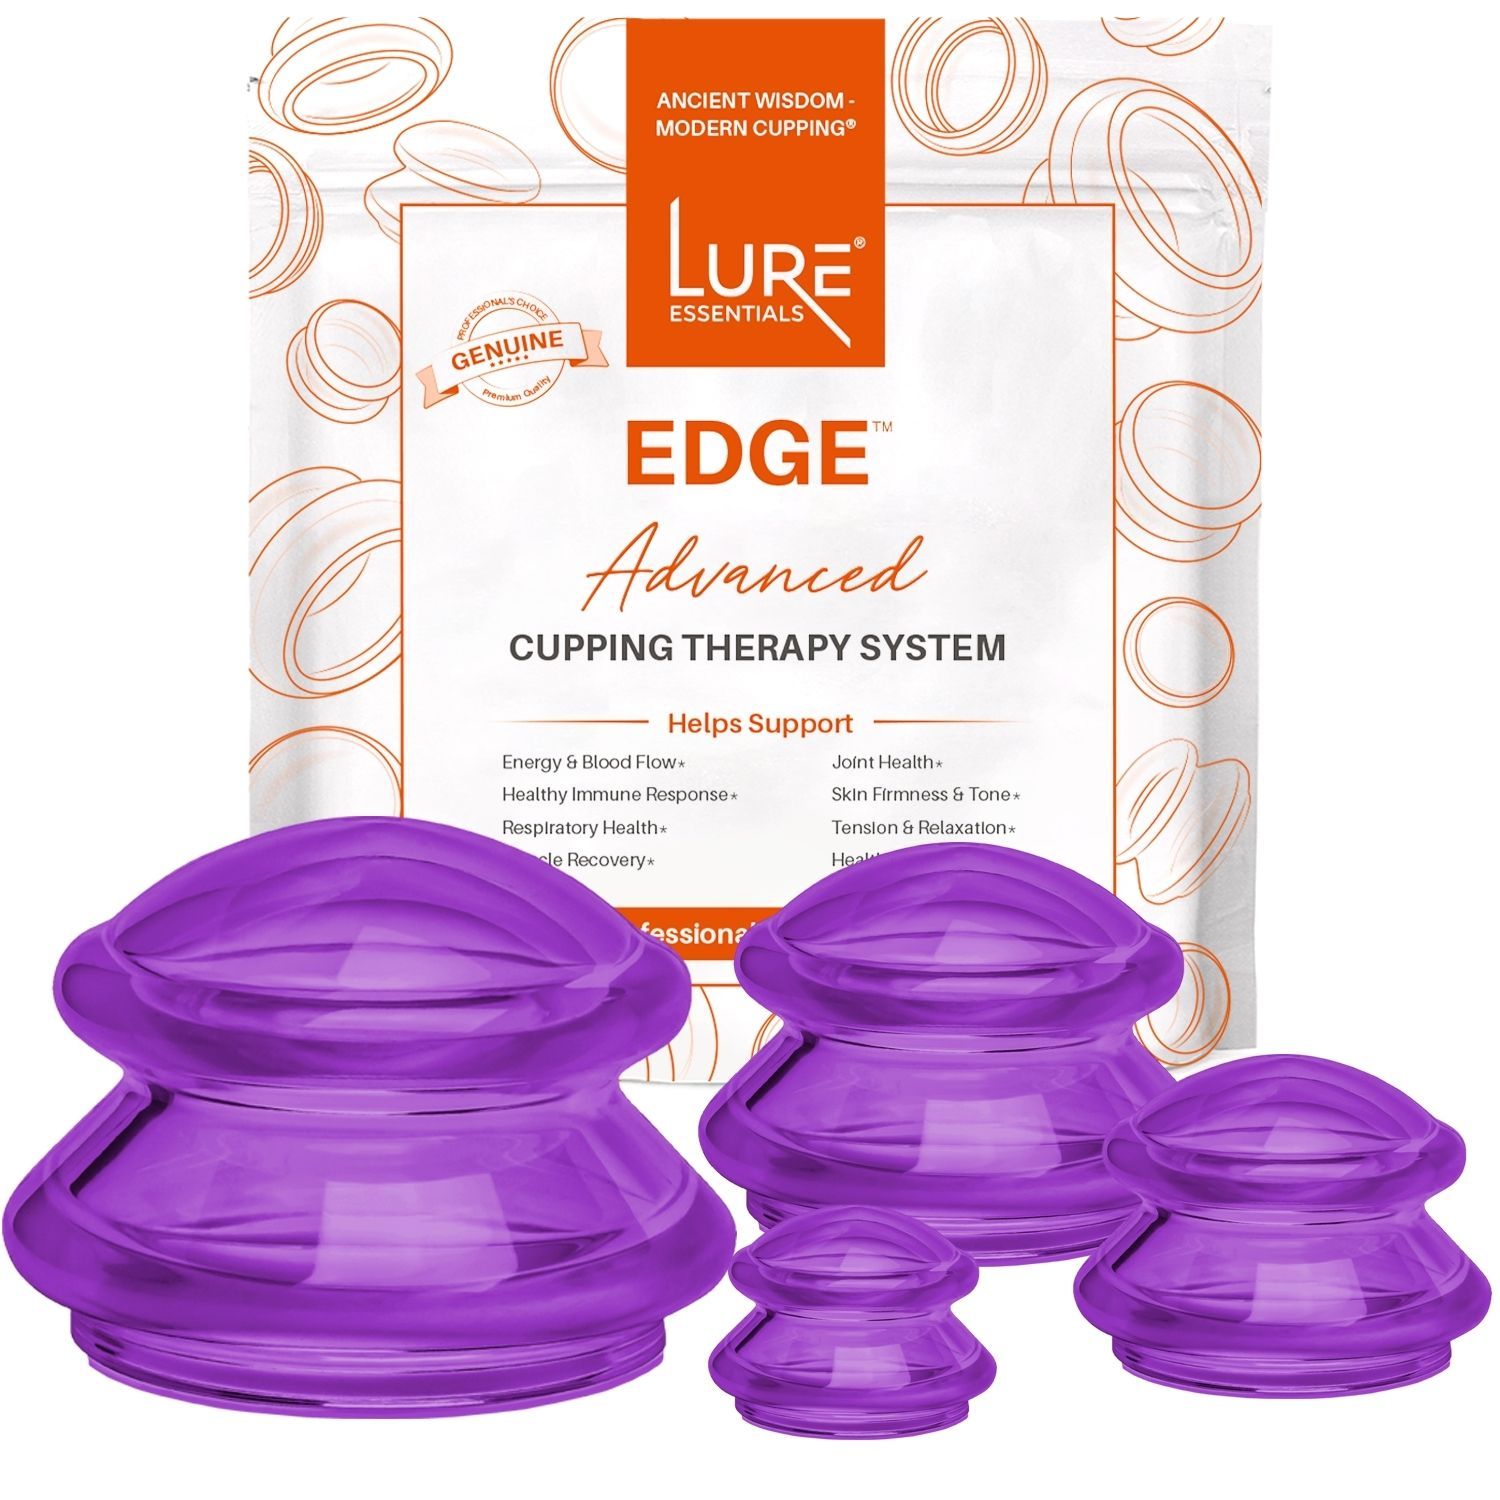 Lure Essentials Edge Cupping Therapy Set - Cupping Kit for Massage Therapy - Silicone Cupping Set - Massage Cups for Cupping Therapy, (8 Cups - 2L